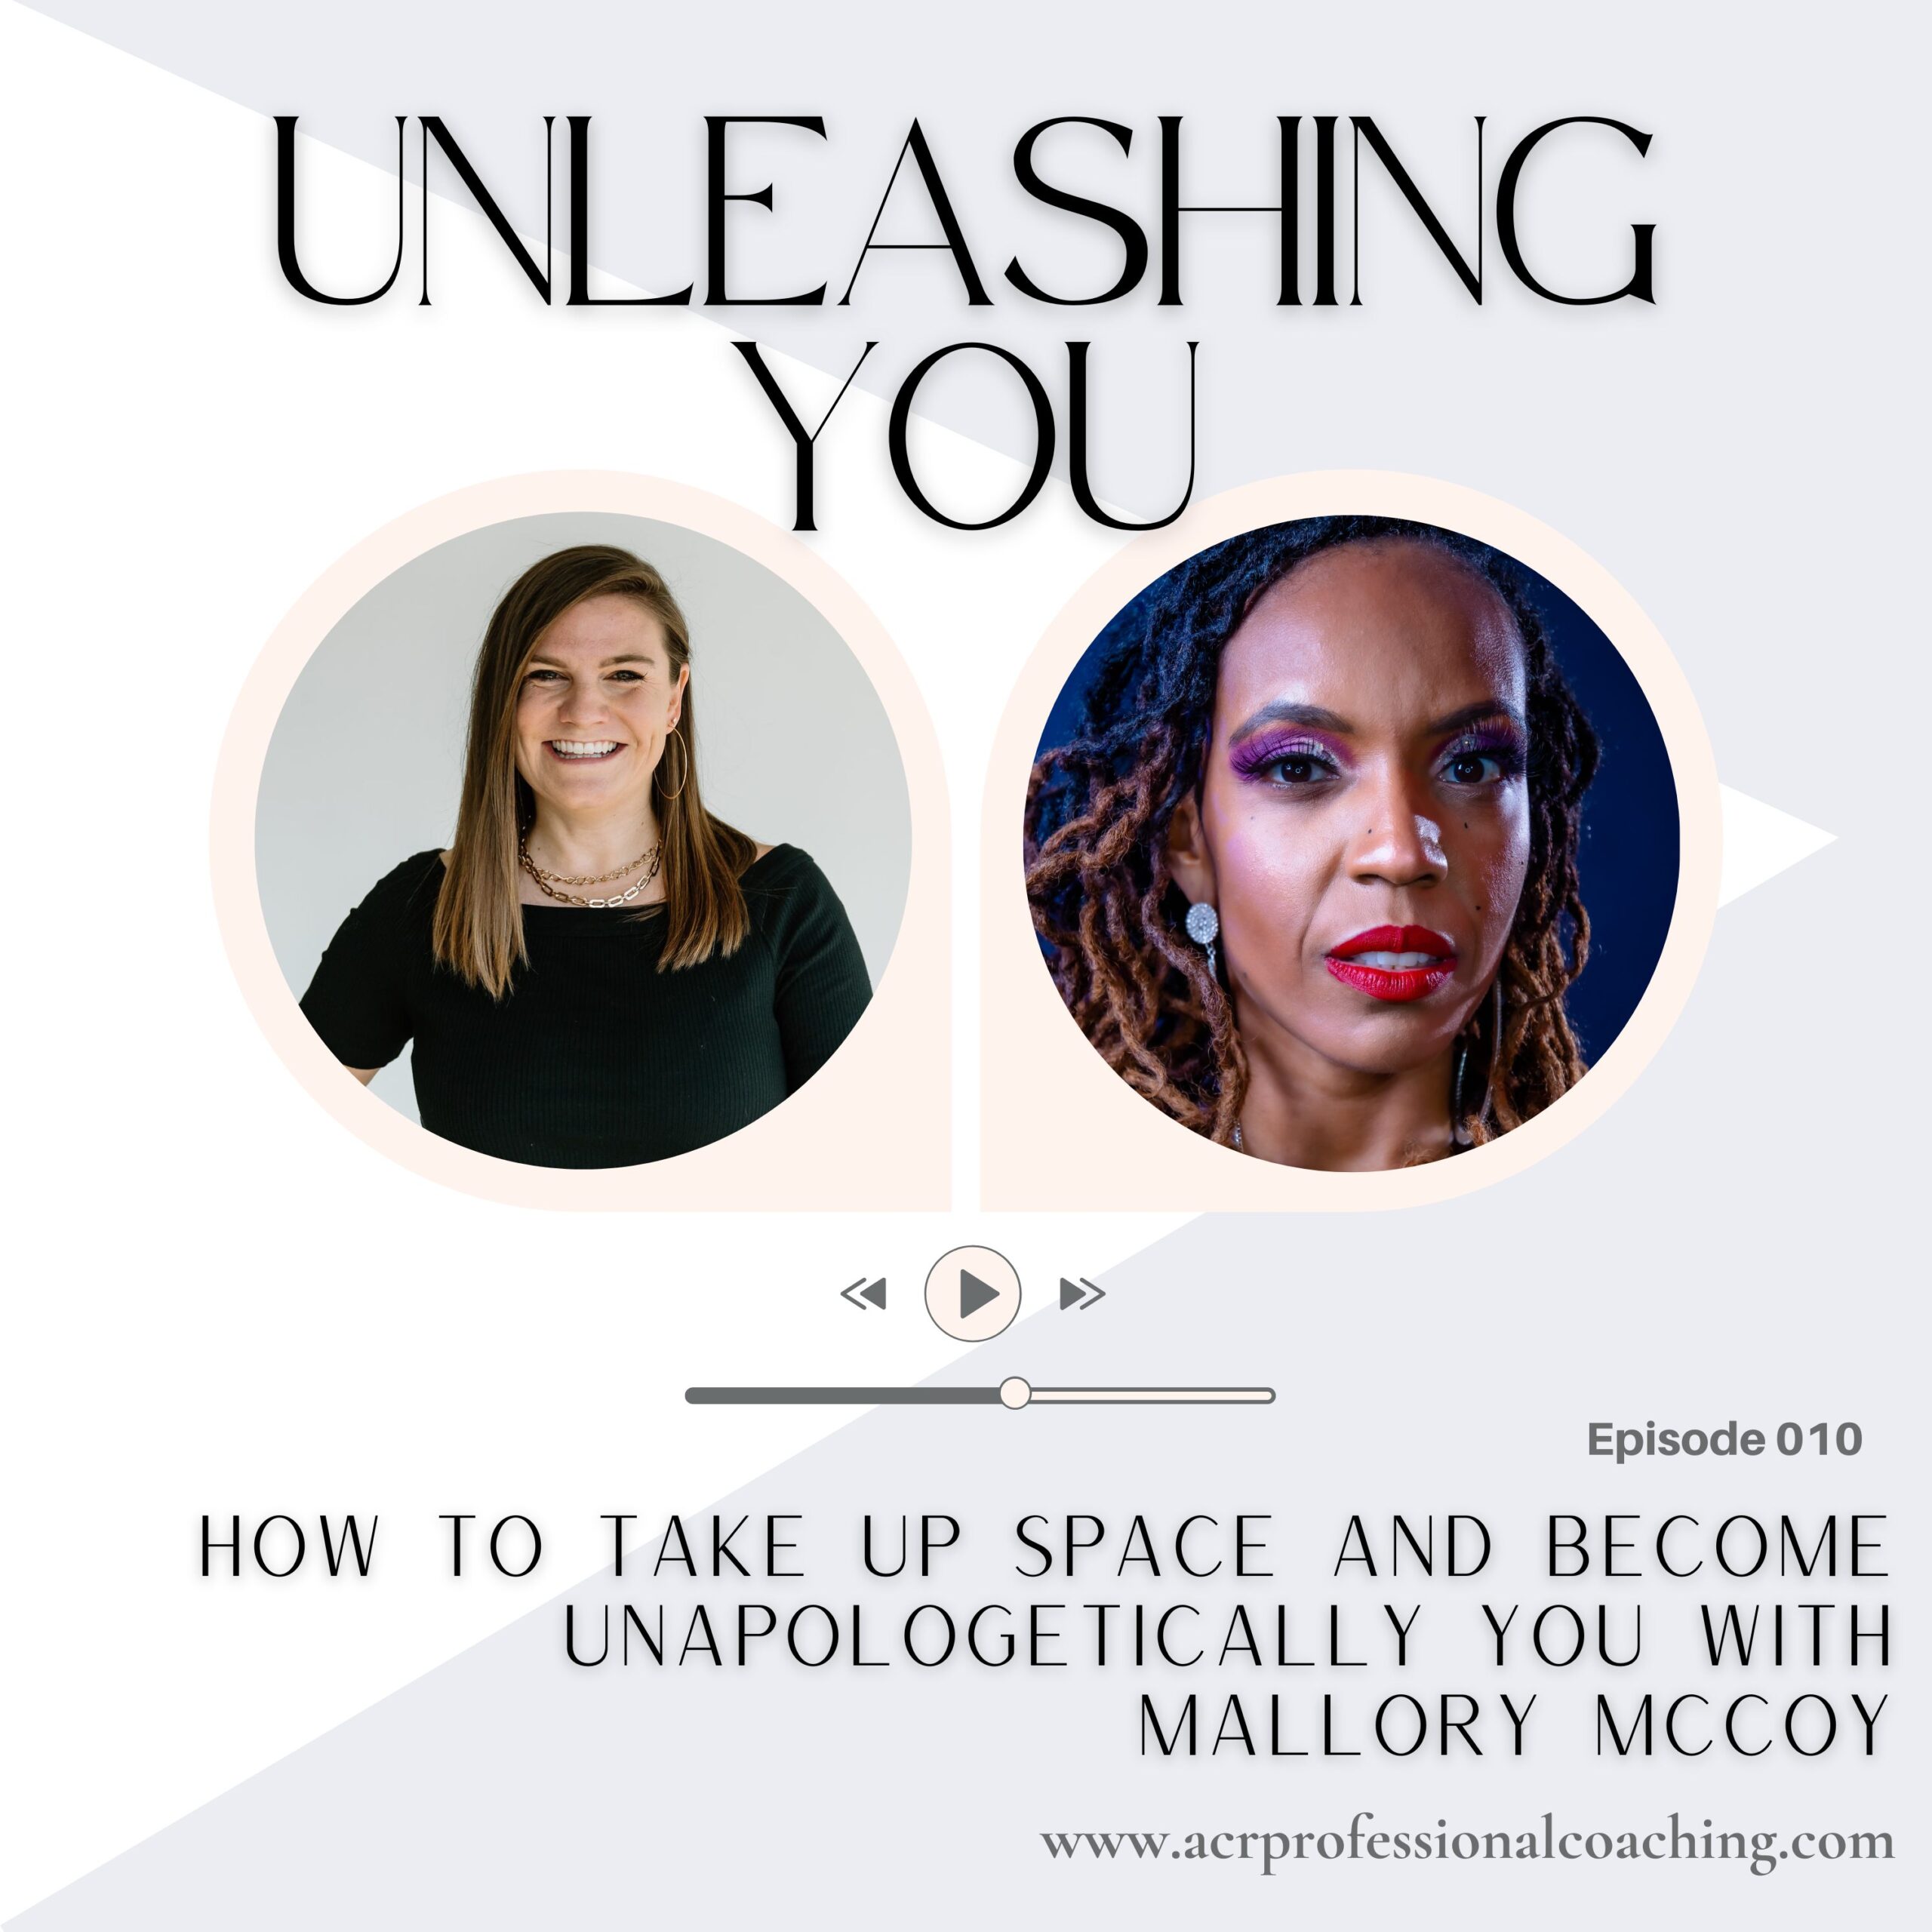 How to Take Up Space and Become Unapologetically You with Mallory McCoy